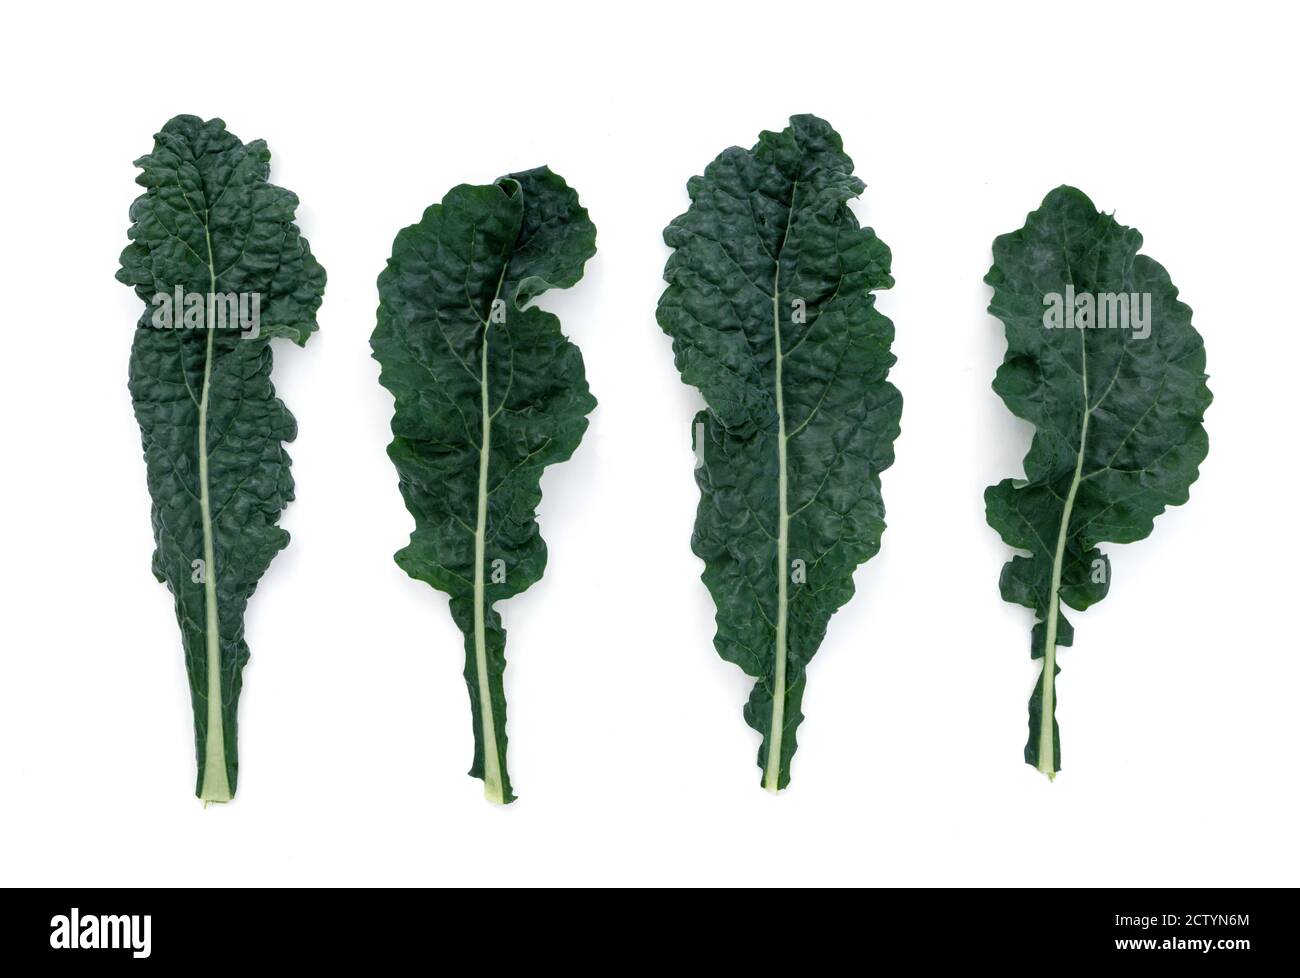 Lacinato Kale. Superfood harvest. Also known as  Dinosaur Kale, Tuscan Kale or "Cavolo Nero". Multiple dark blue-green embossed leaves grown in organi Stock Photo